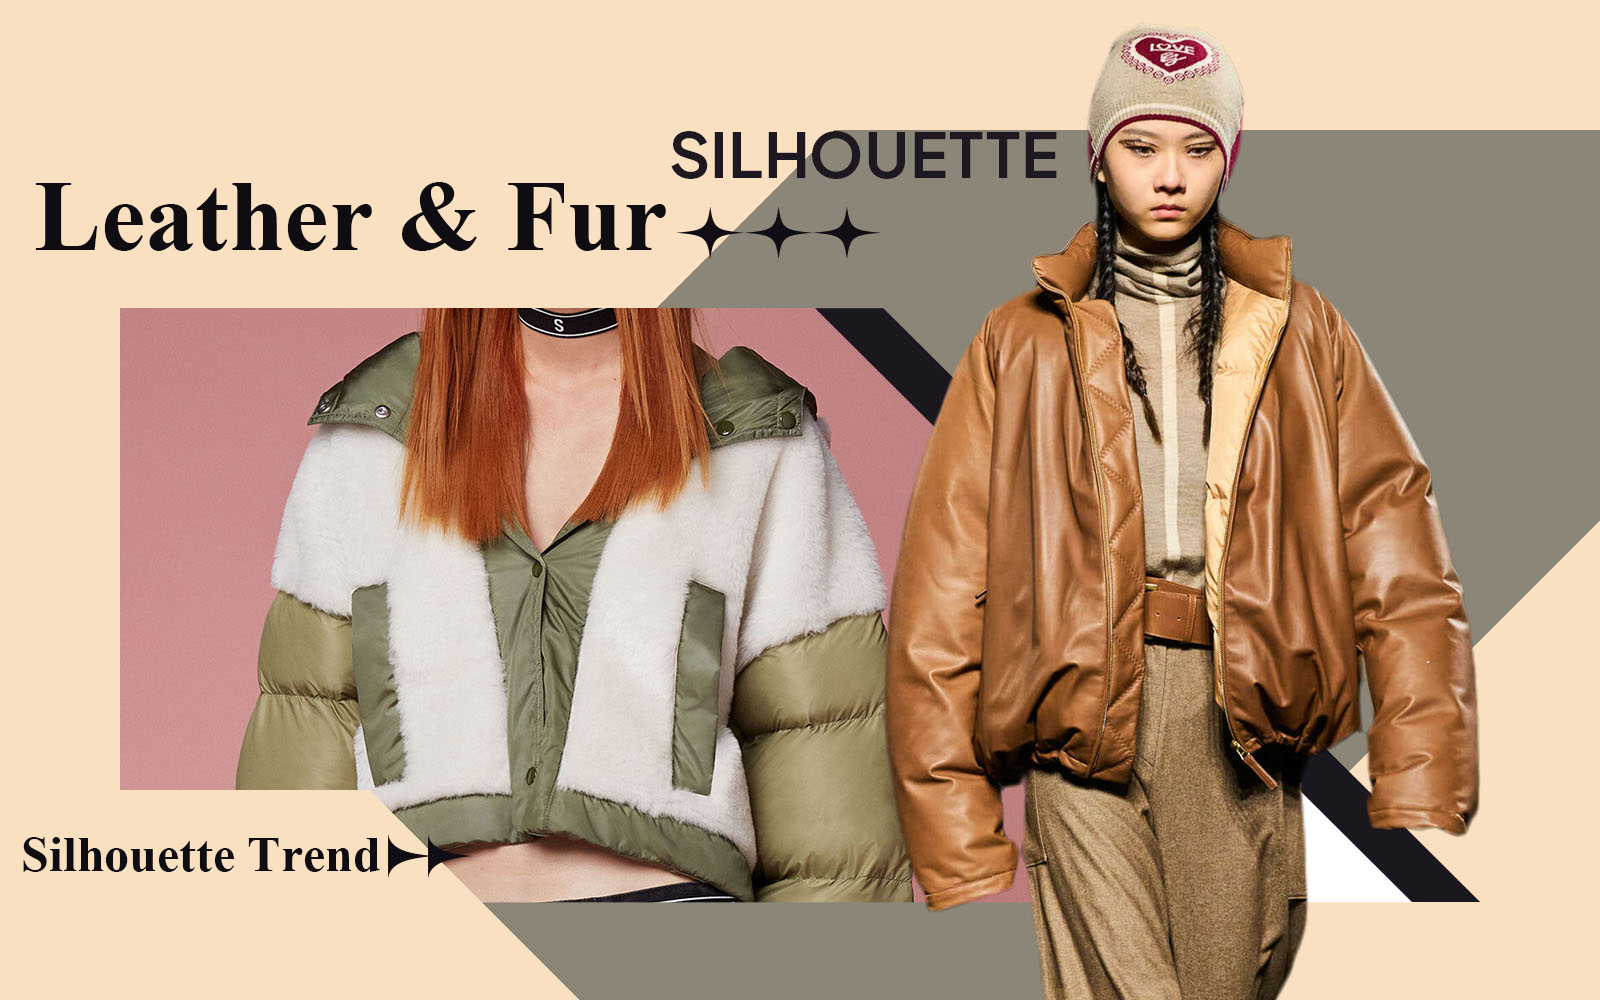 The Silhouette Trend for Women's Leather & Fur